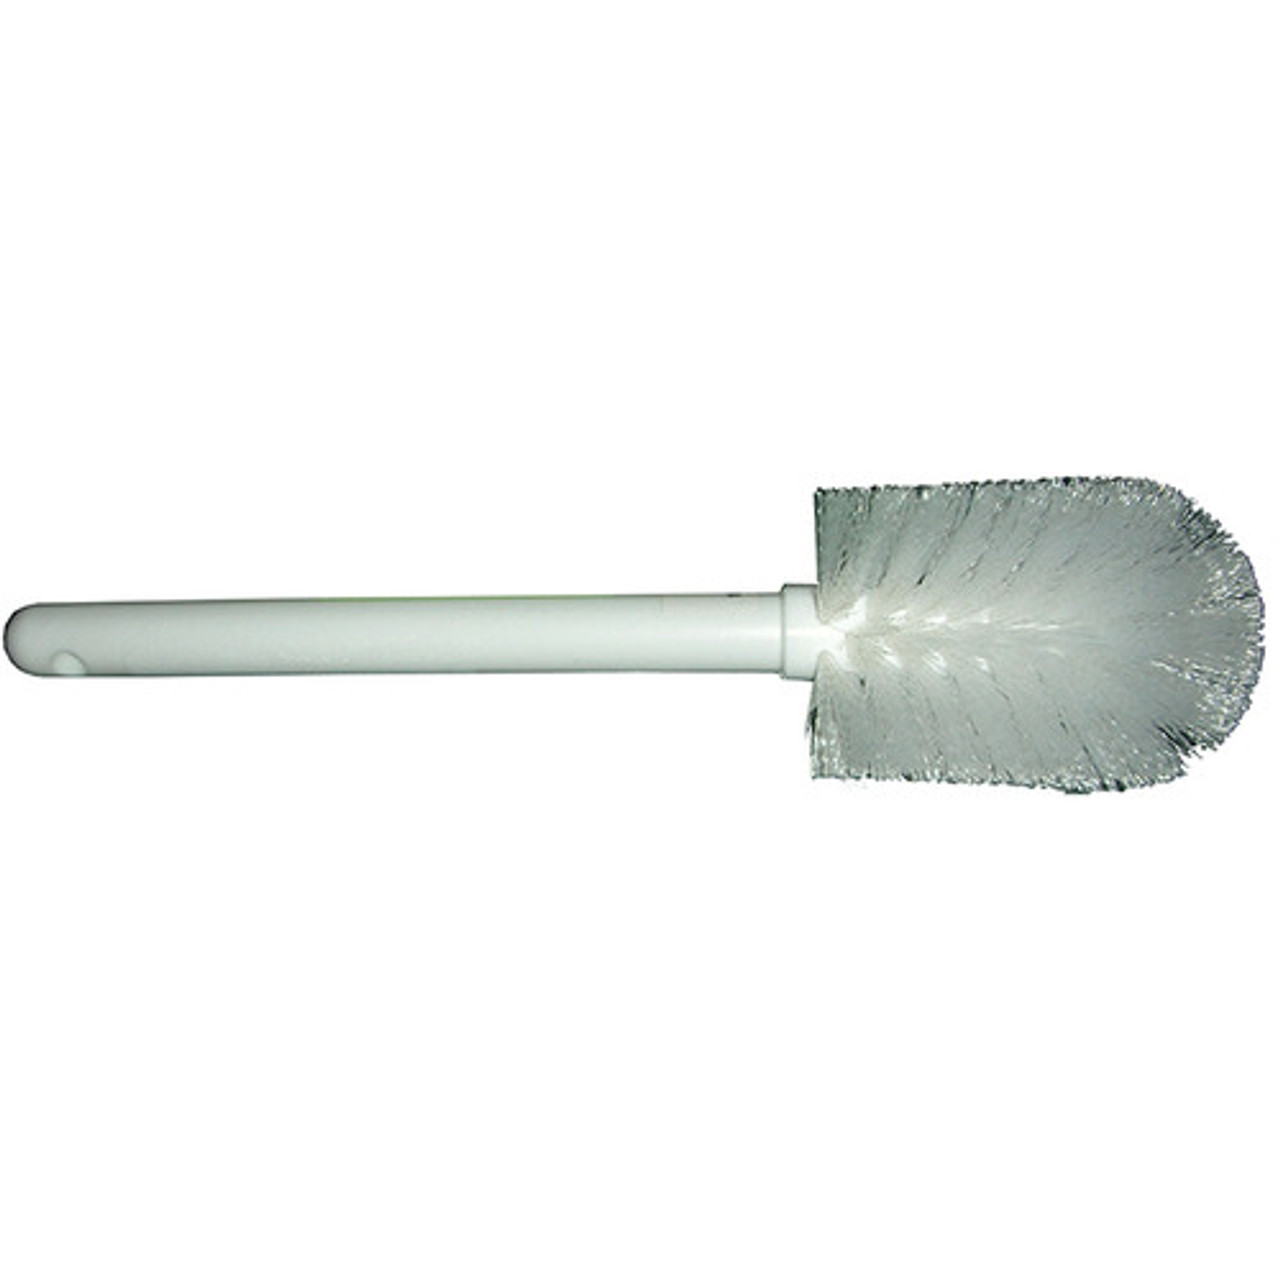 Coffee Maker Cleaning Brush - Classic Hardware Co.,Limited